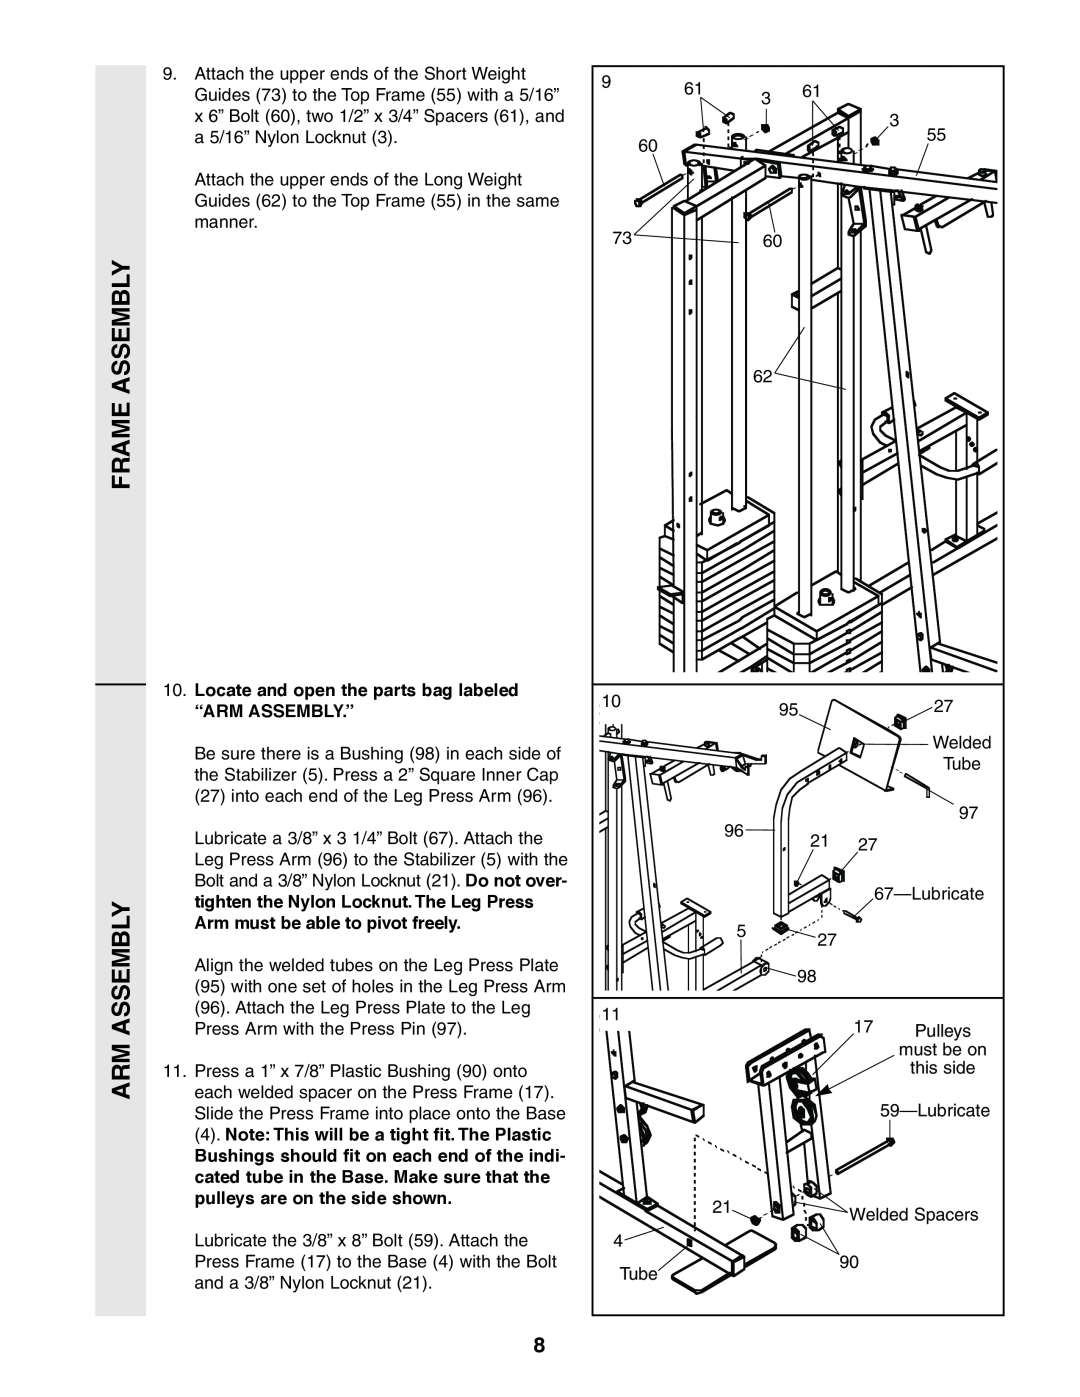 Weider 831.159380 Arm Assembly, Locate and open the parts bag labeled “ARM ASSEMBLY.”, Arm must be able to pivot freely 